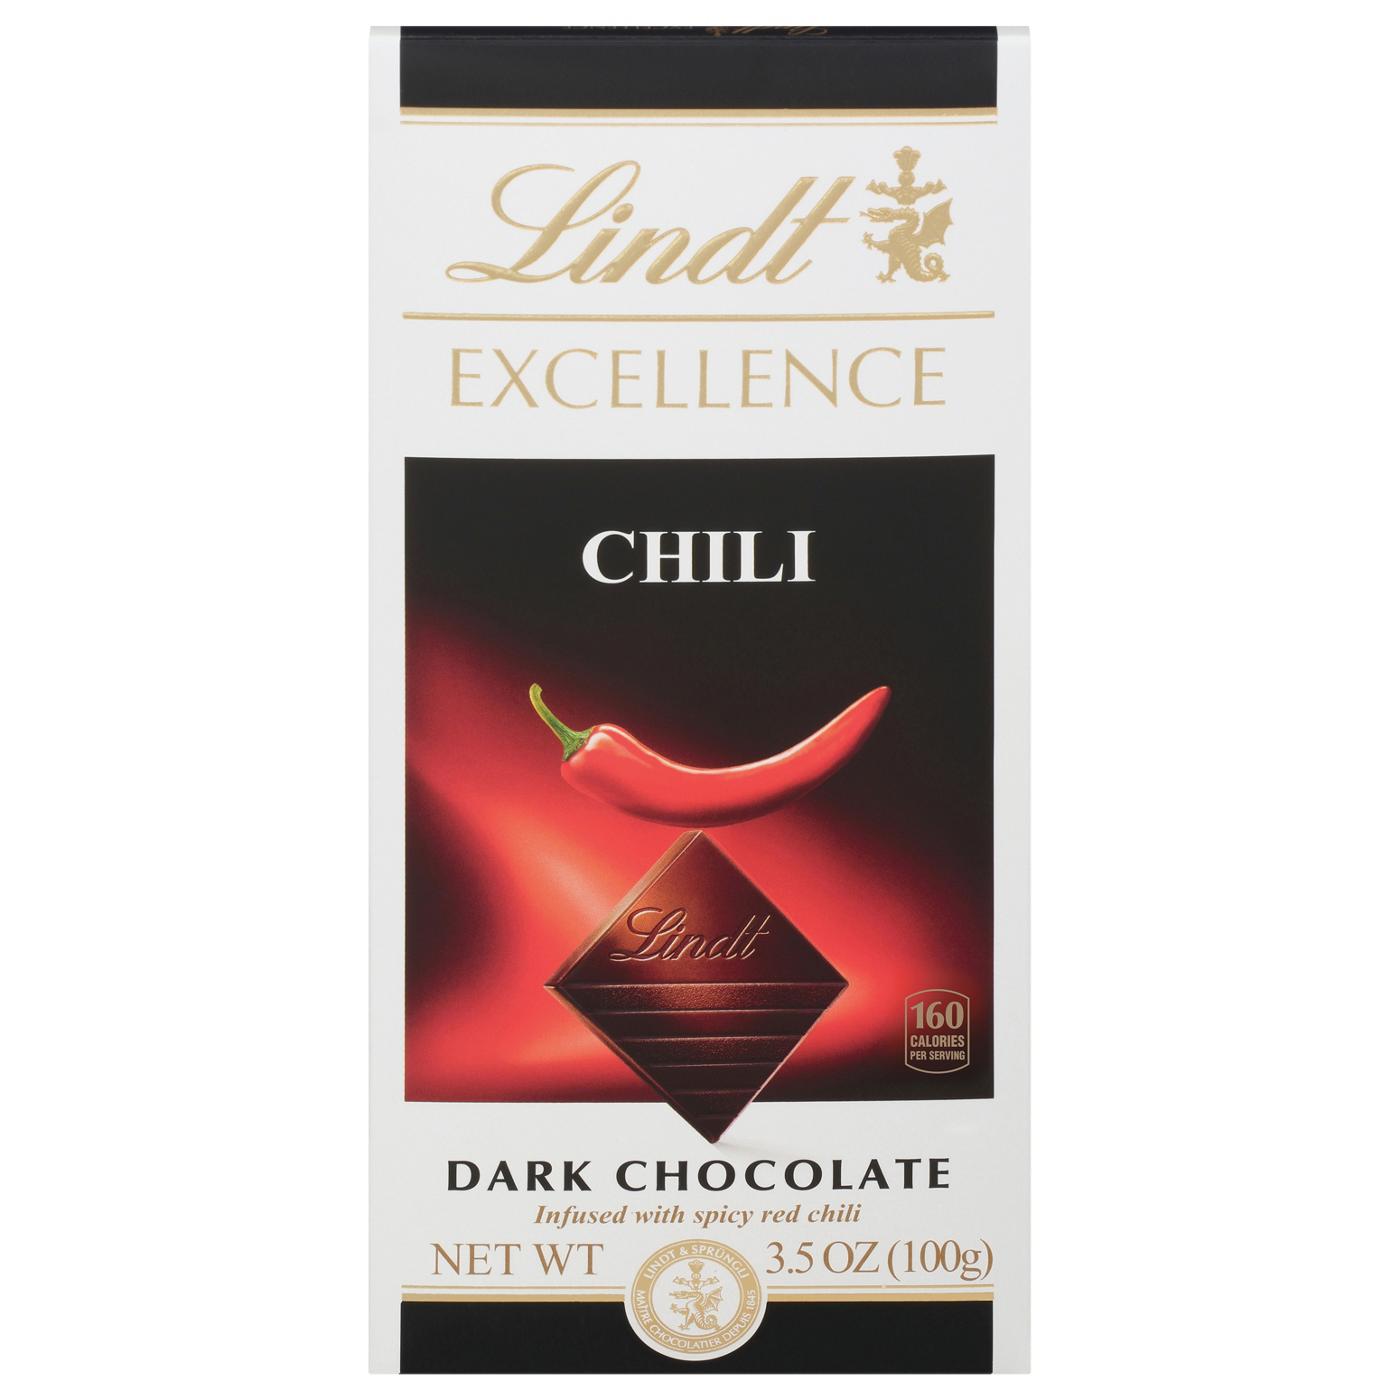 Lindt Excellence Chili Dark Chocolate Bar; image 1 of 2